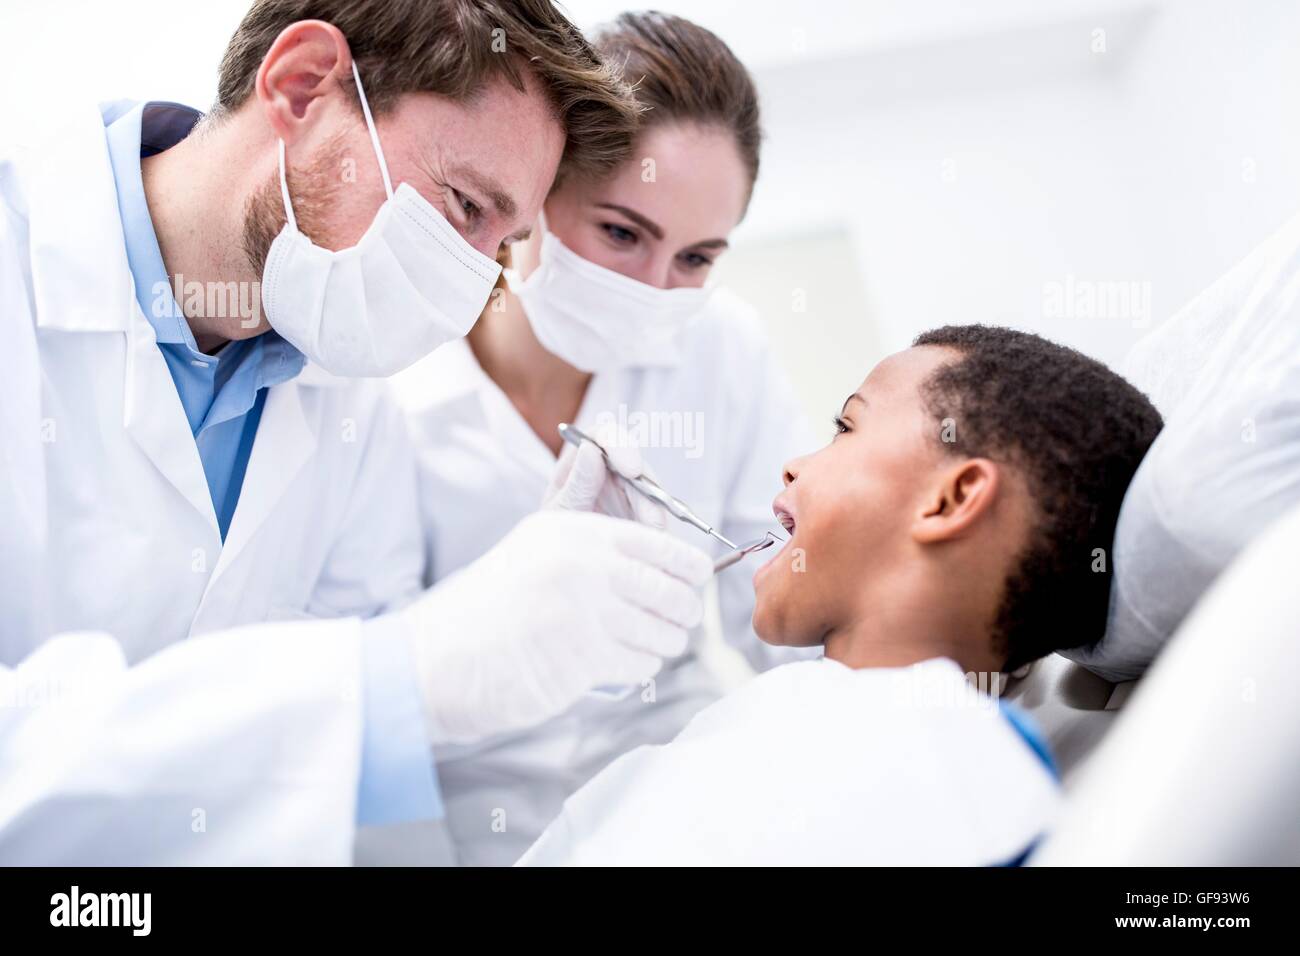 MODEL RELEASED. Doctors examining boy's teeth in clinic, smiling. Stock Photo